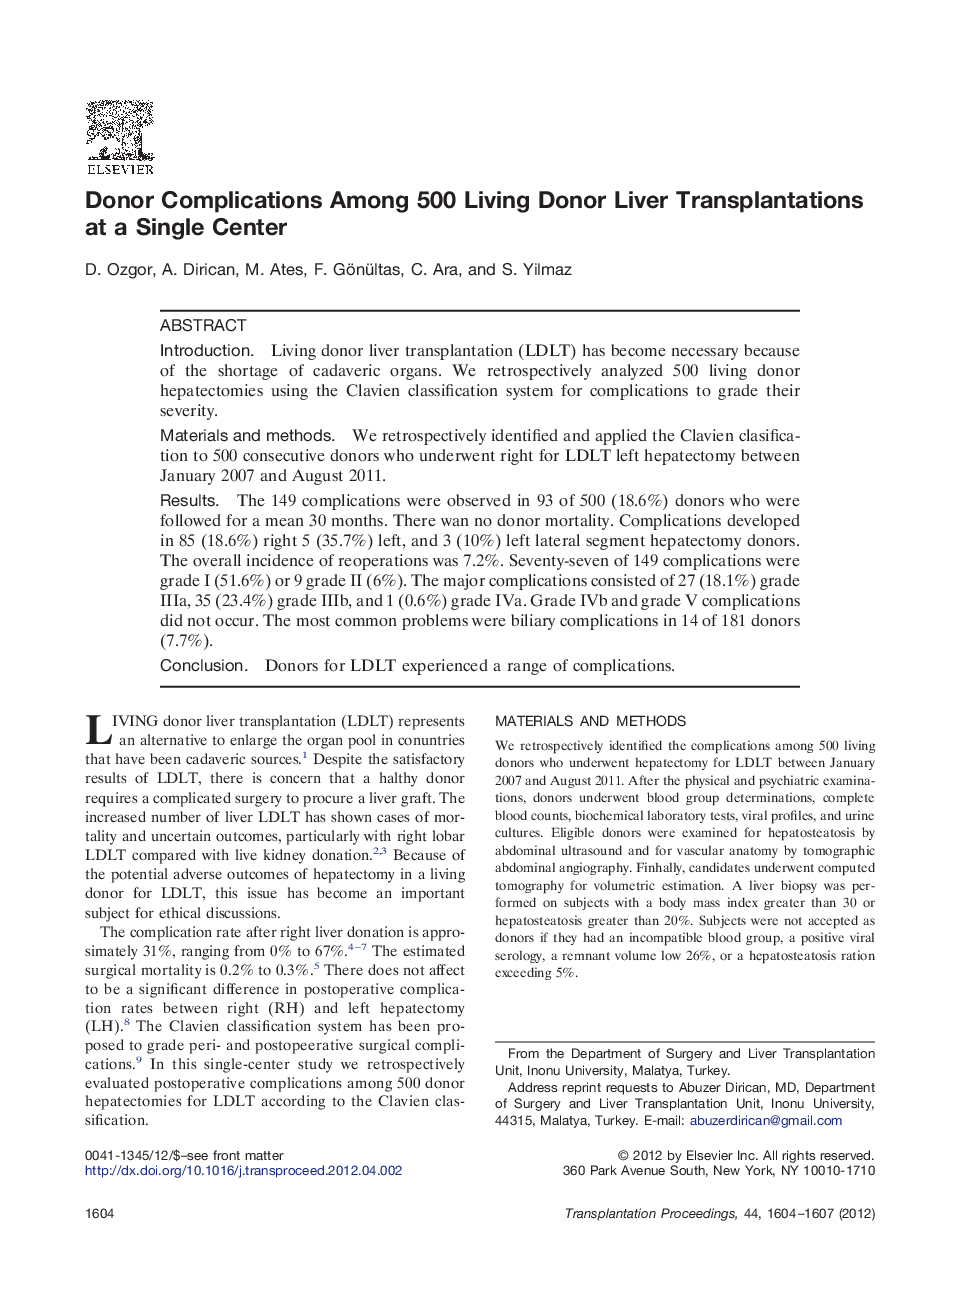 Donor Complications Among 500 Living Donor Liver Transplantations at a Single Center